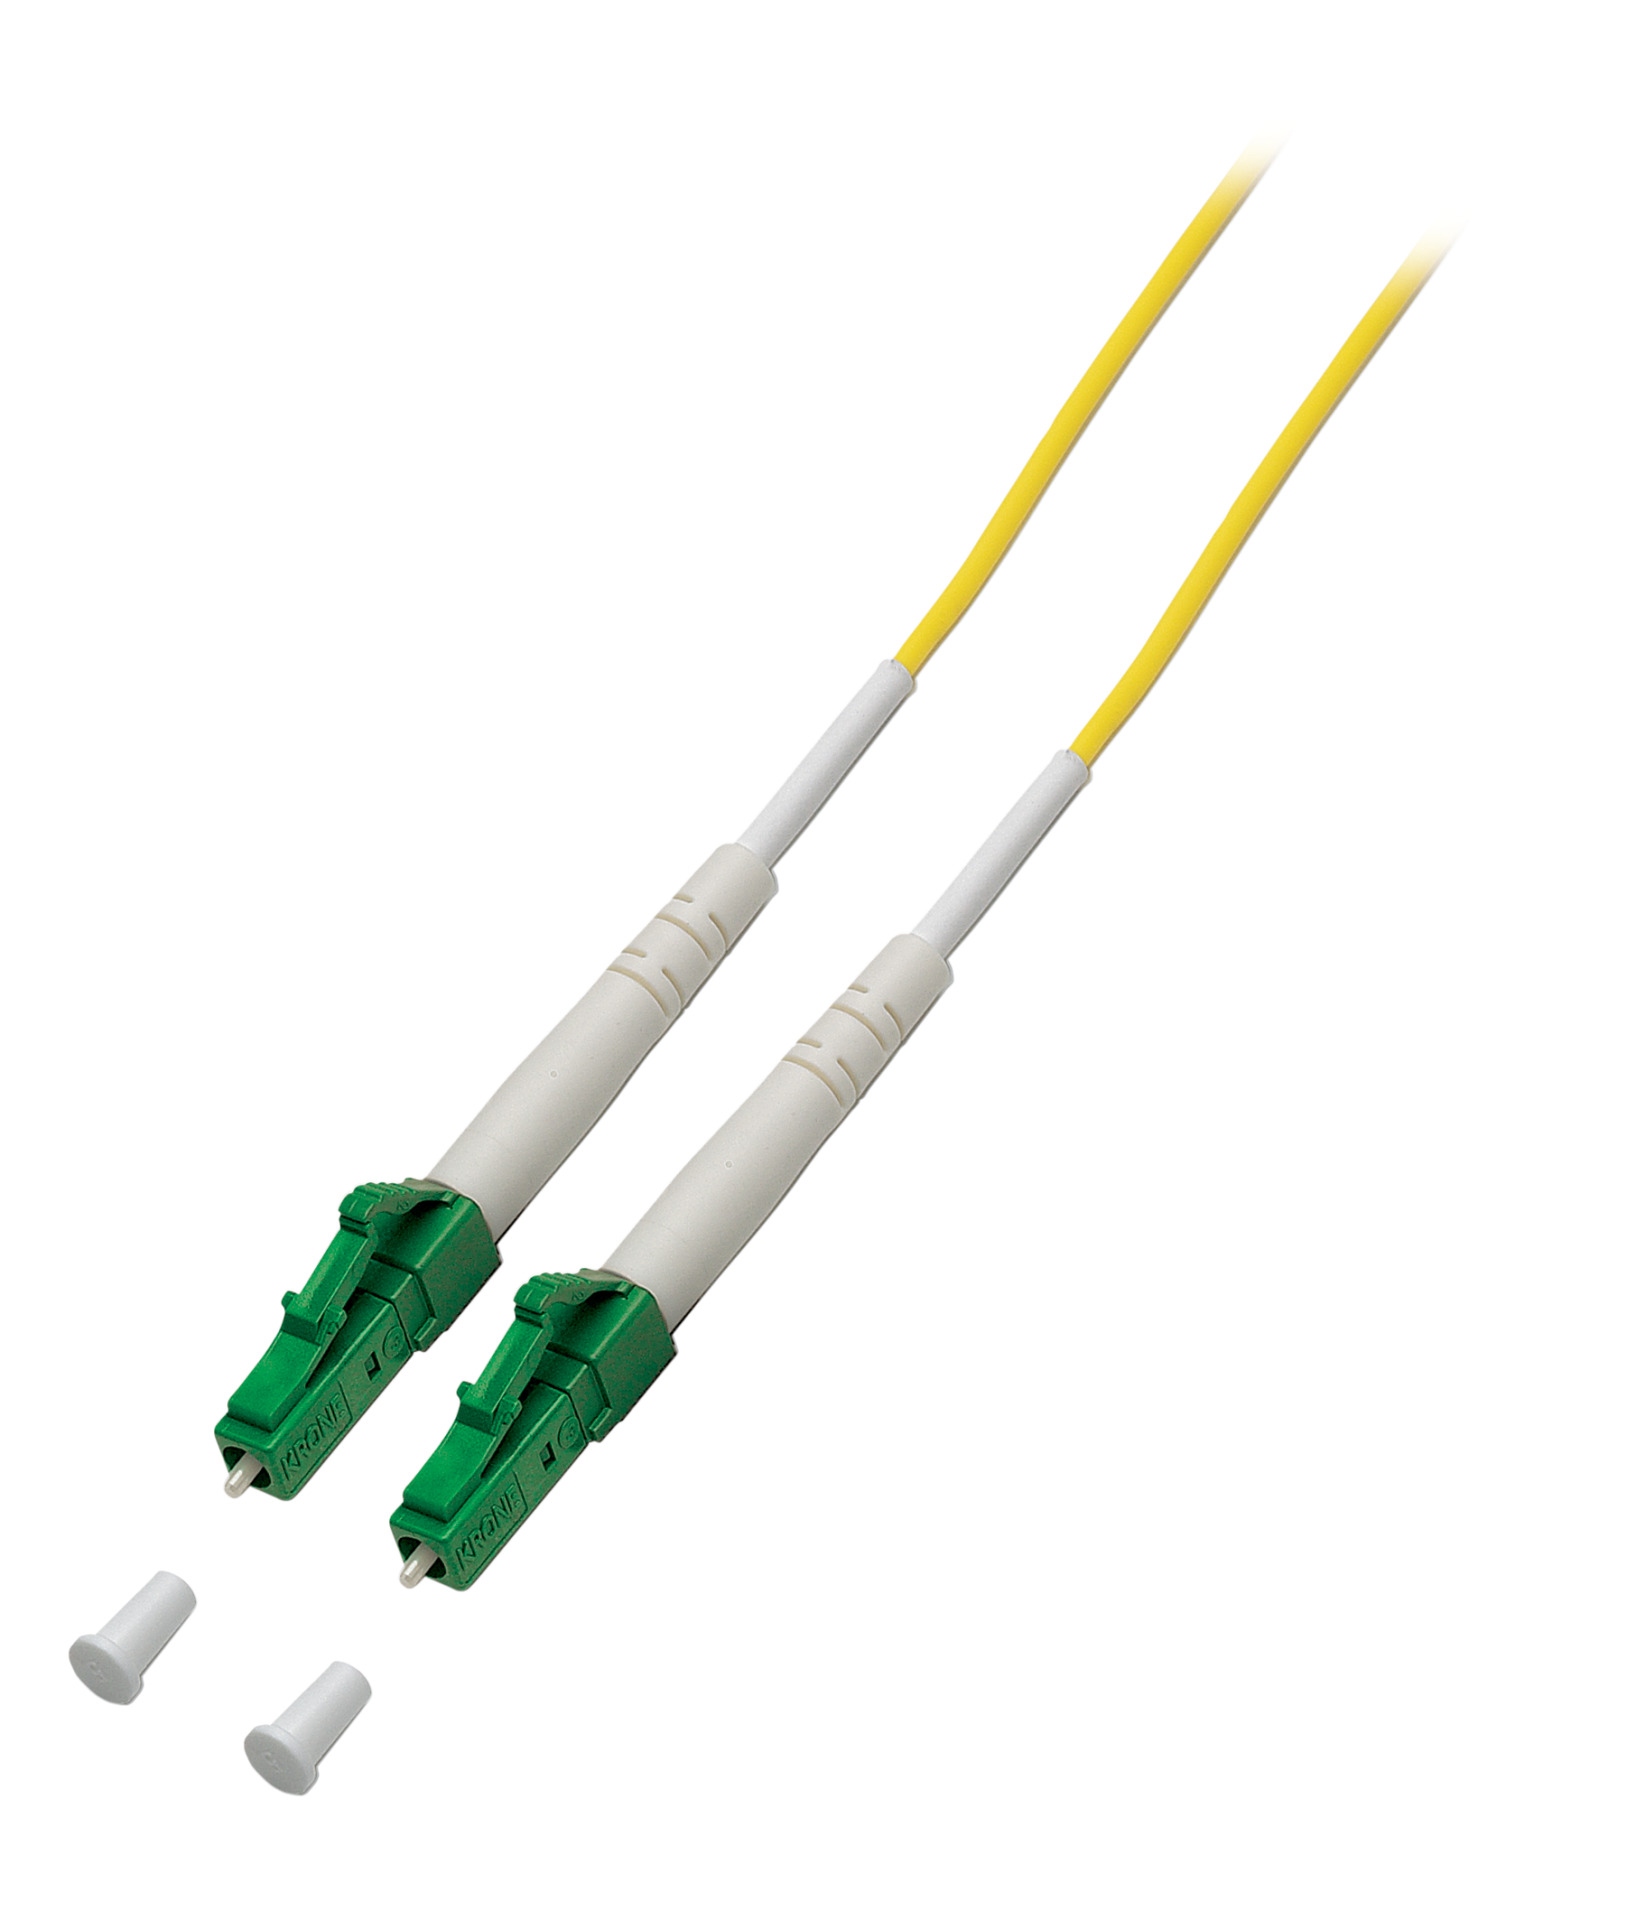 Simplex FO Patch Cable LC/APC-LC/APC G657.A2 15m 3,0mm yellow 9/125µm